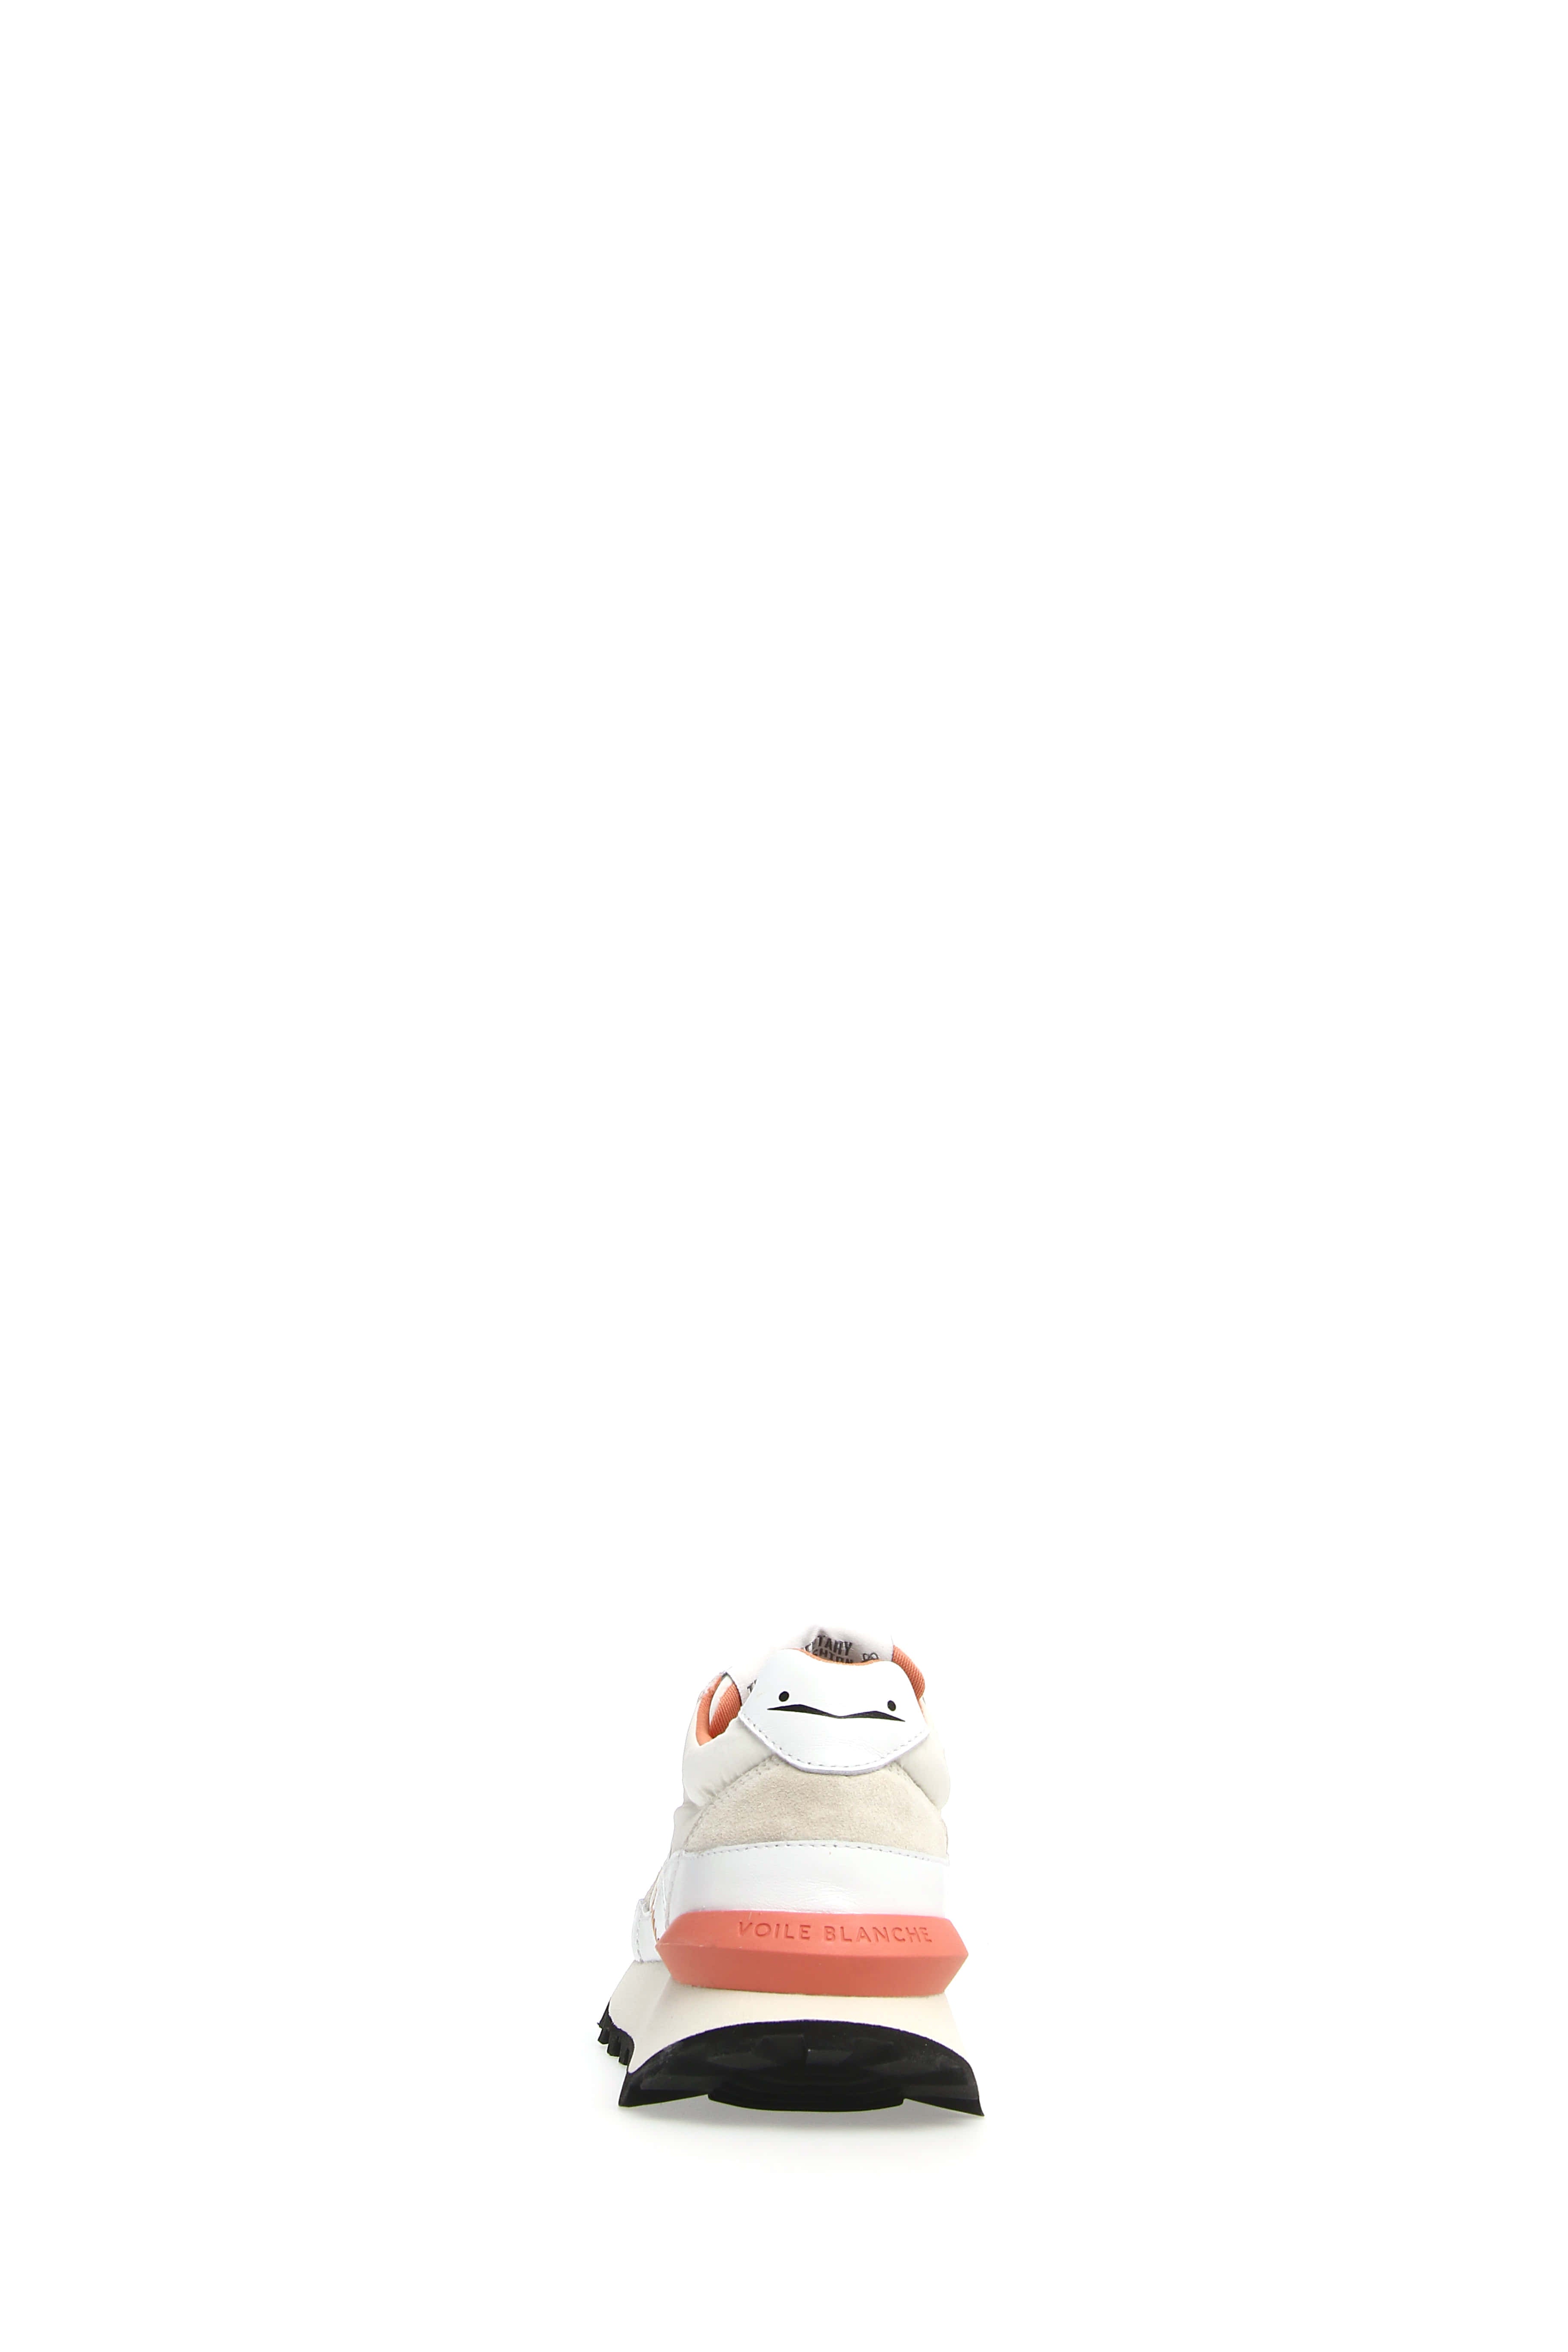 Qwark Hype Suede Off White Chunky Sneakers 2016980050N01 - 3